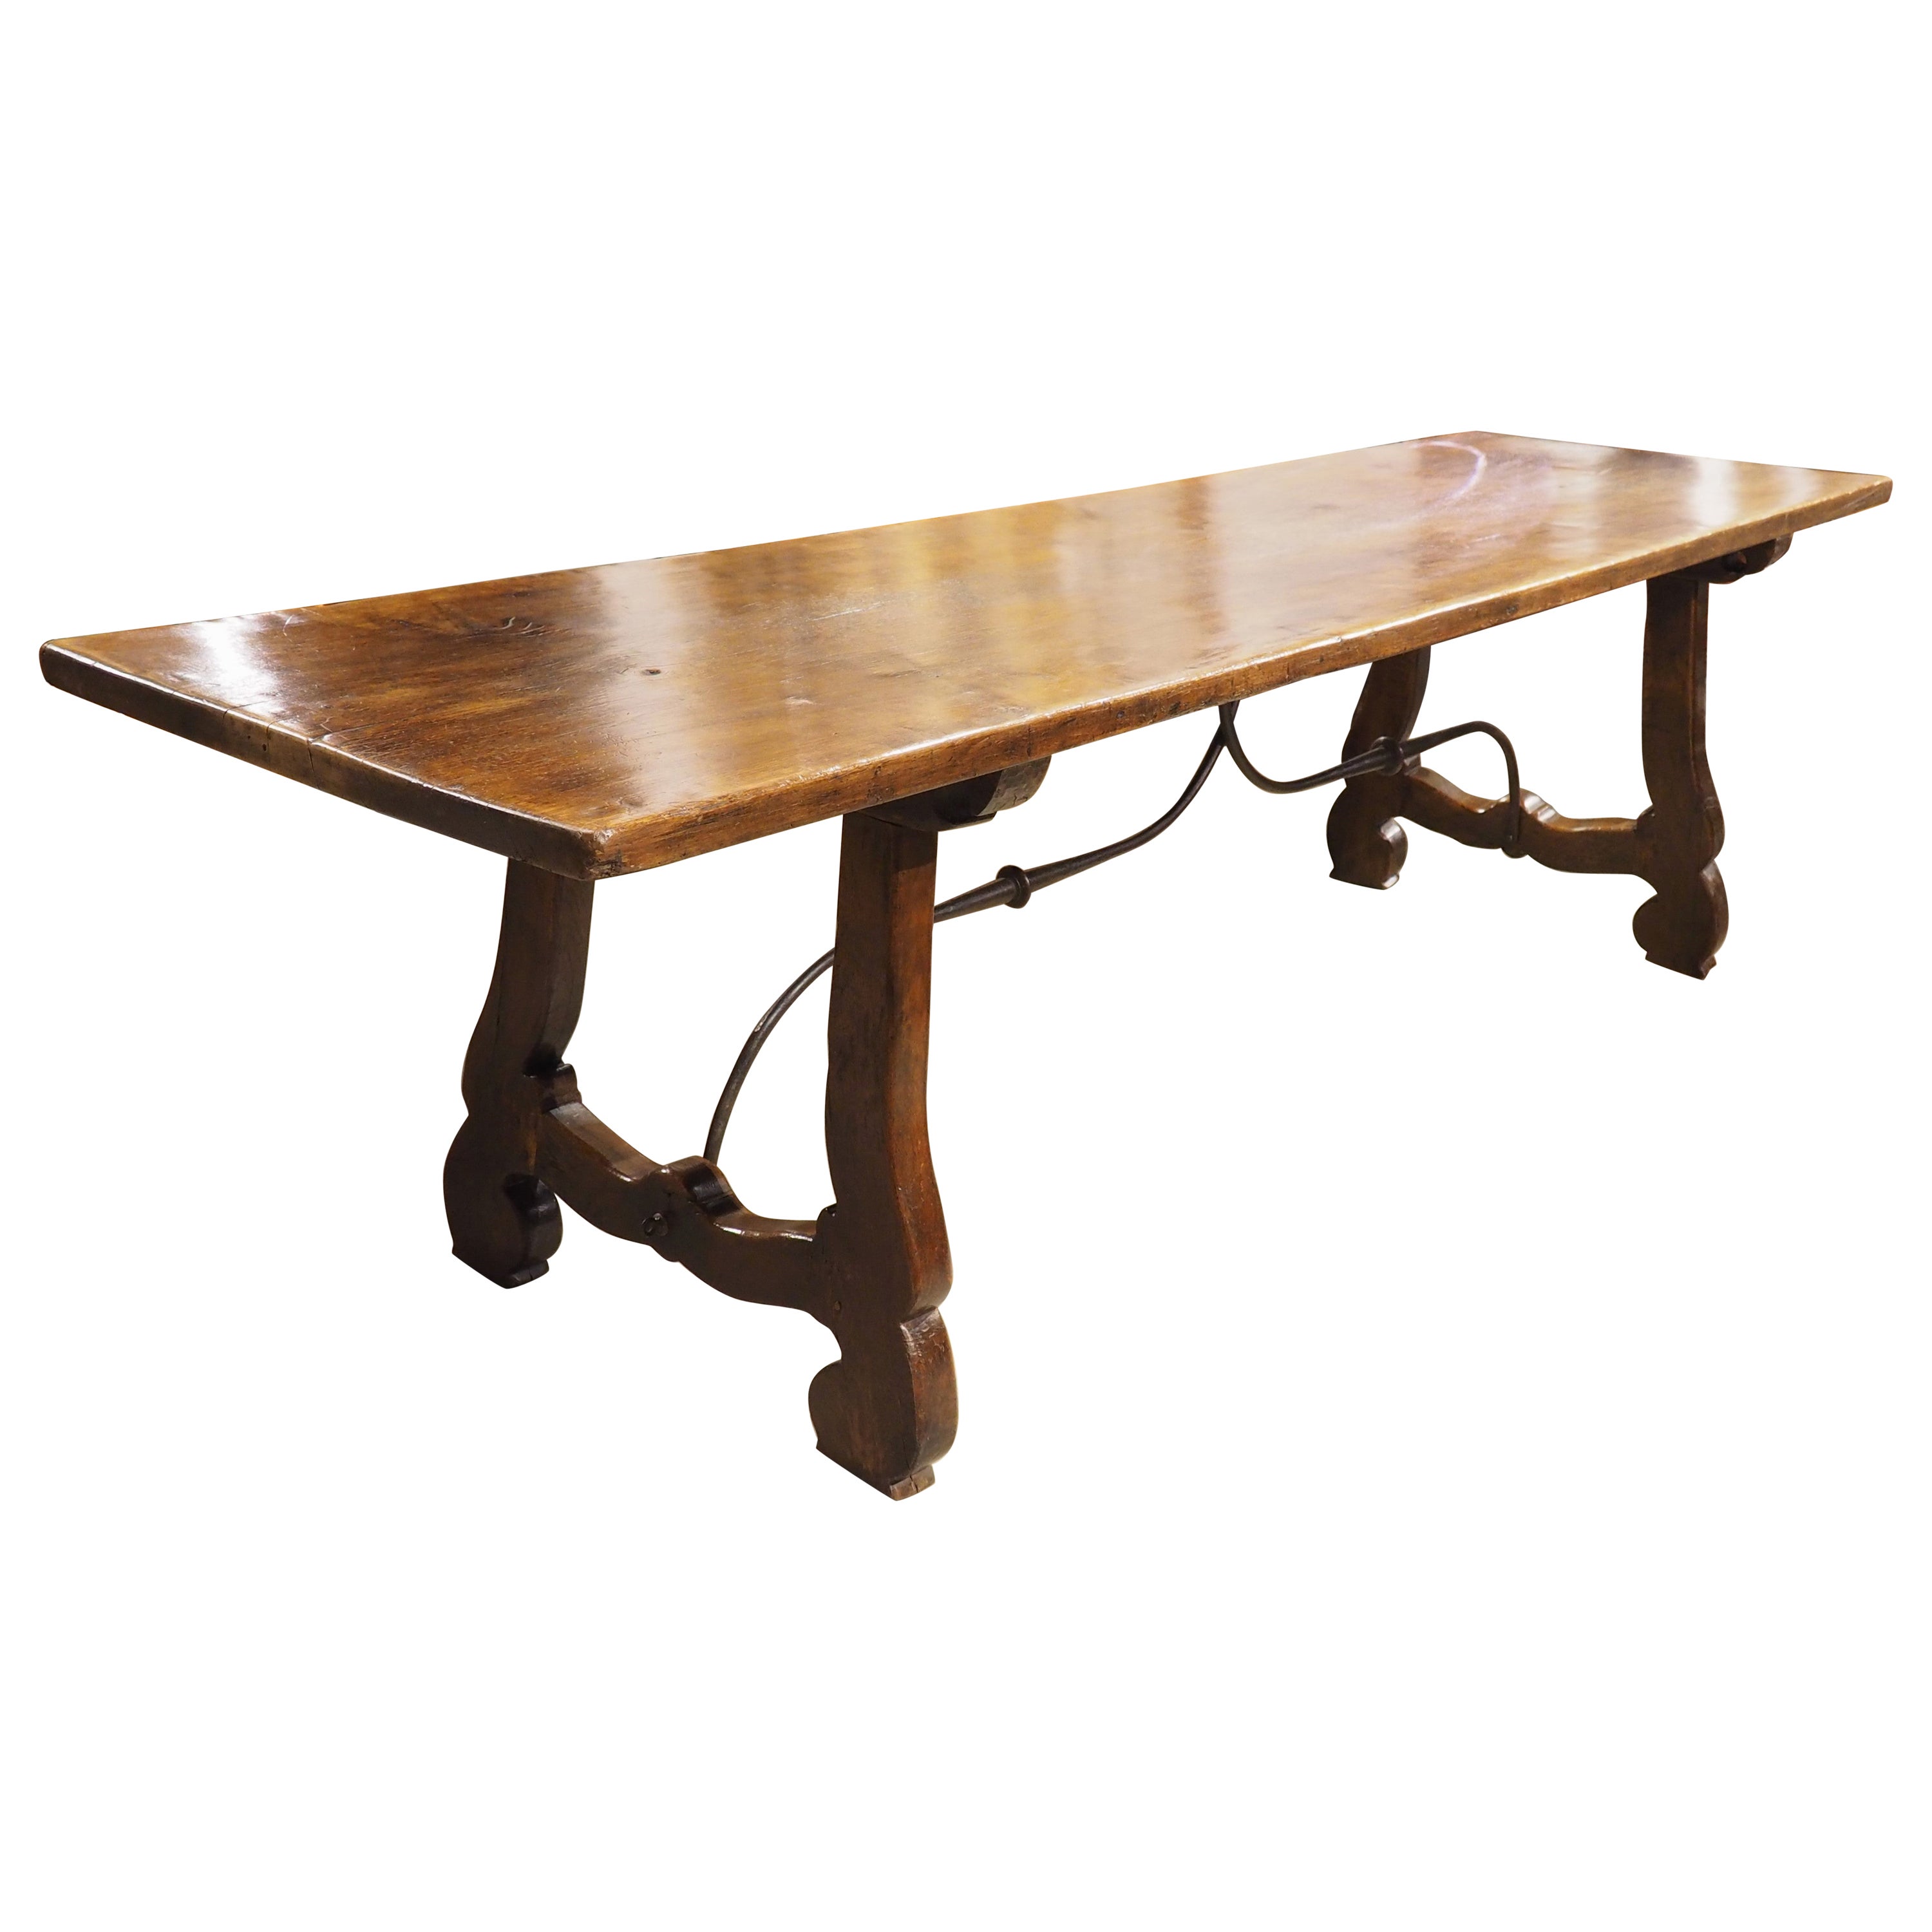 An Elegant 18th Century Single Walnut Plank Top Dining Table from Spain